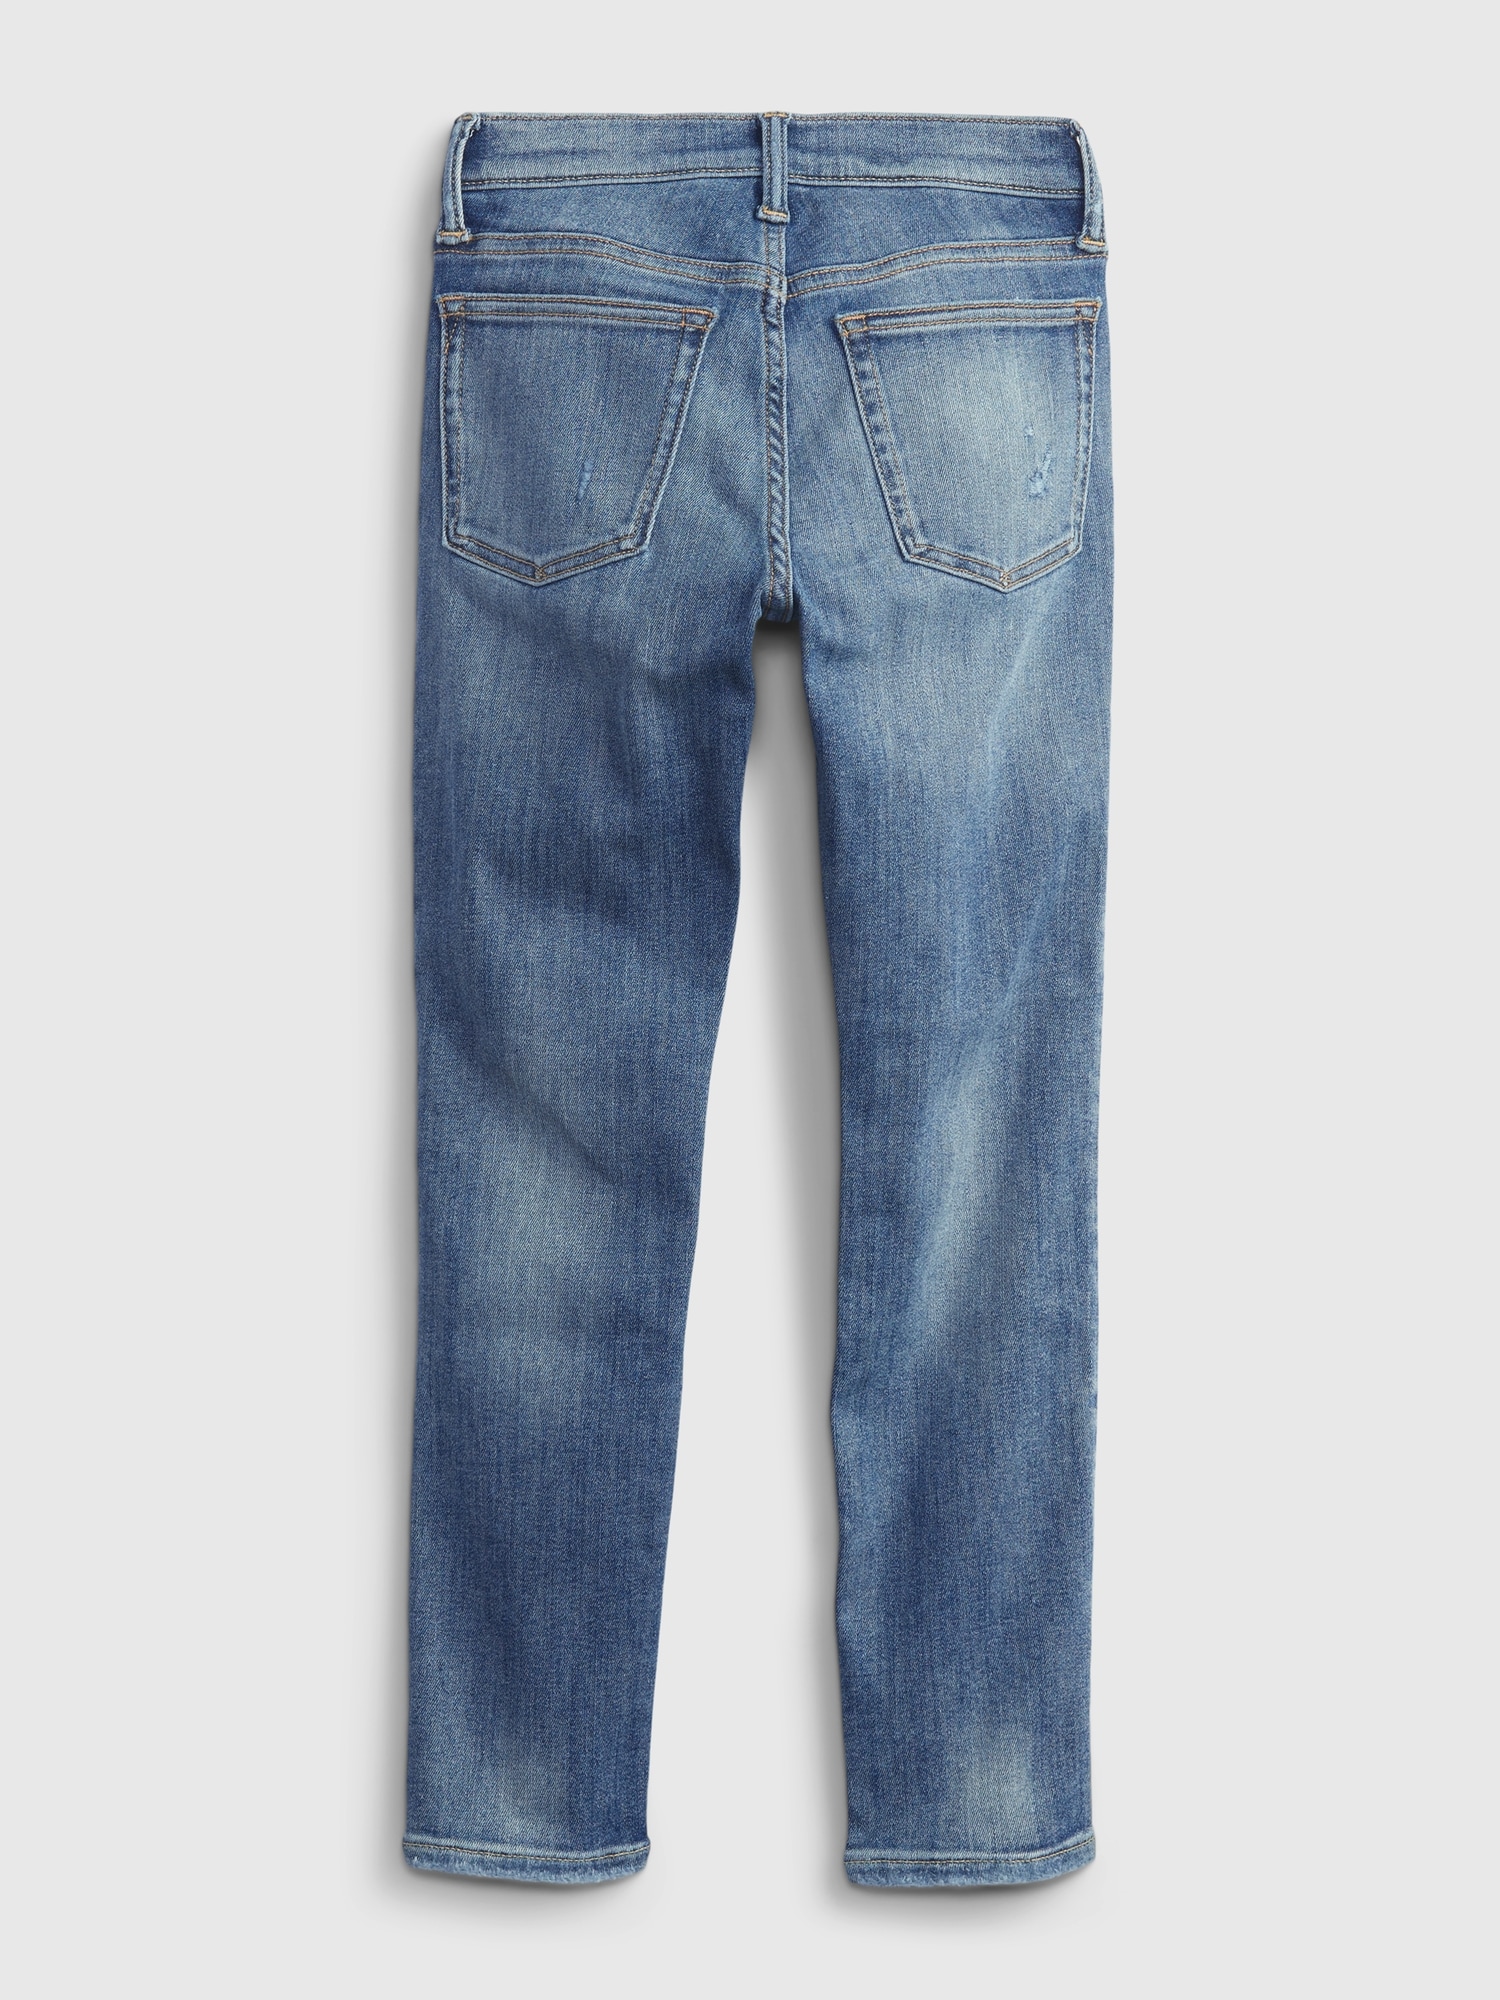 Kids Distressed Skinny Jeans with Washwell | Gap